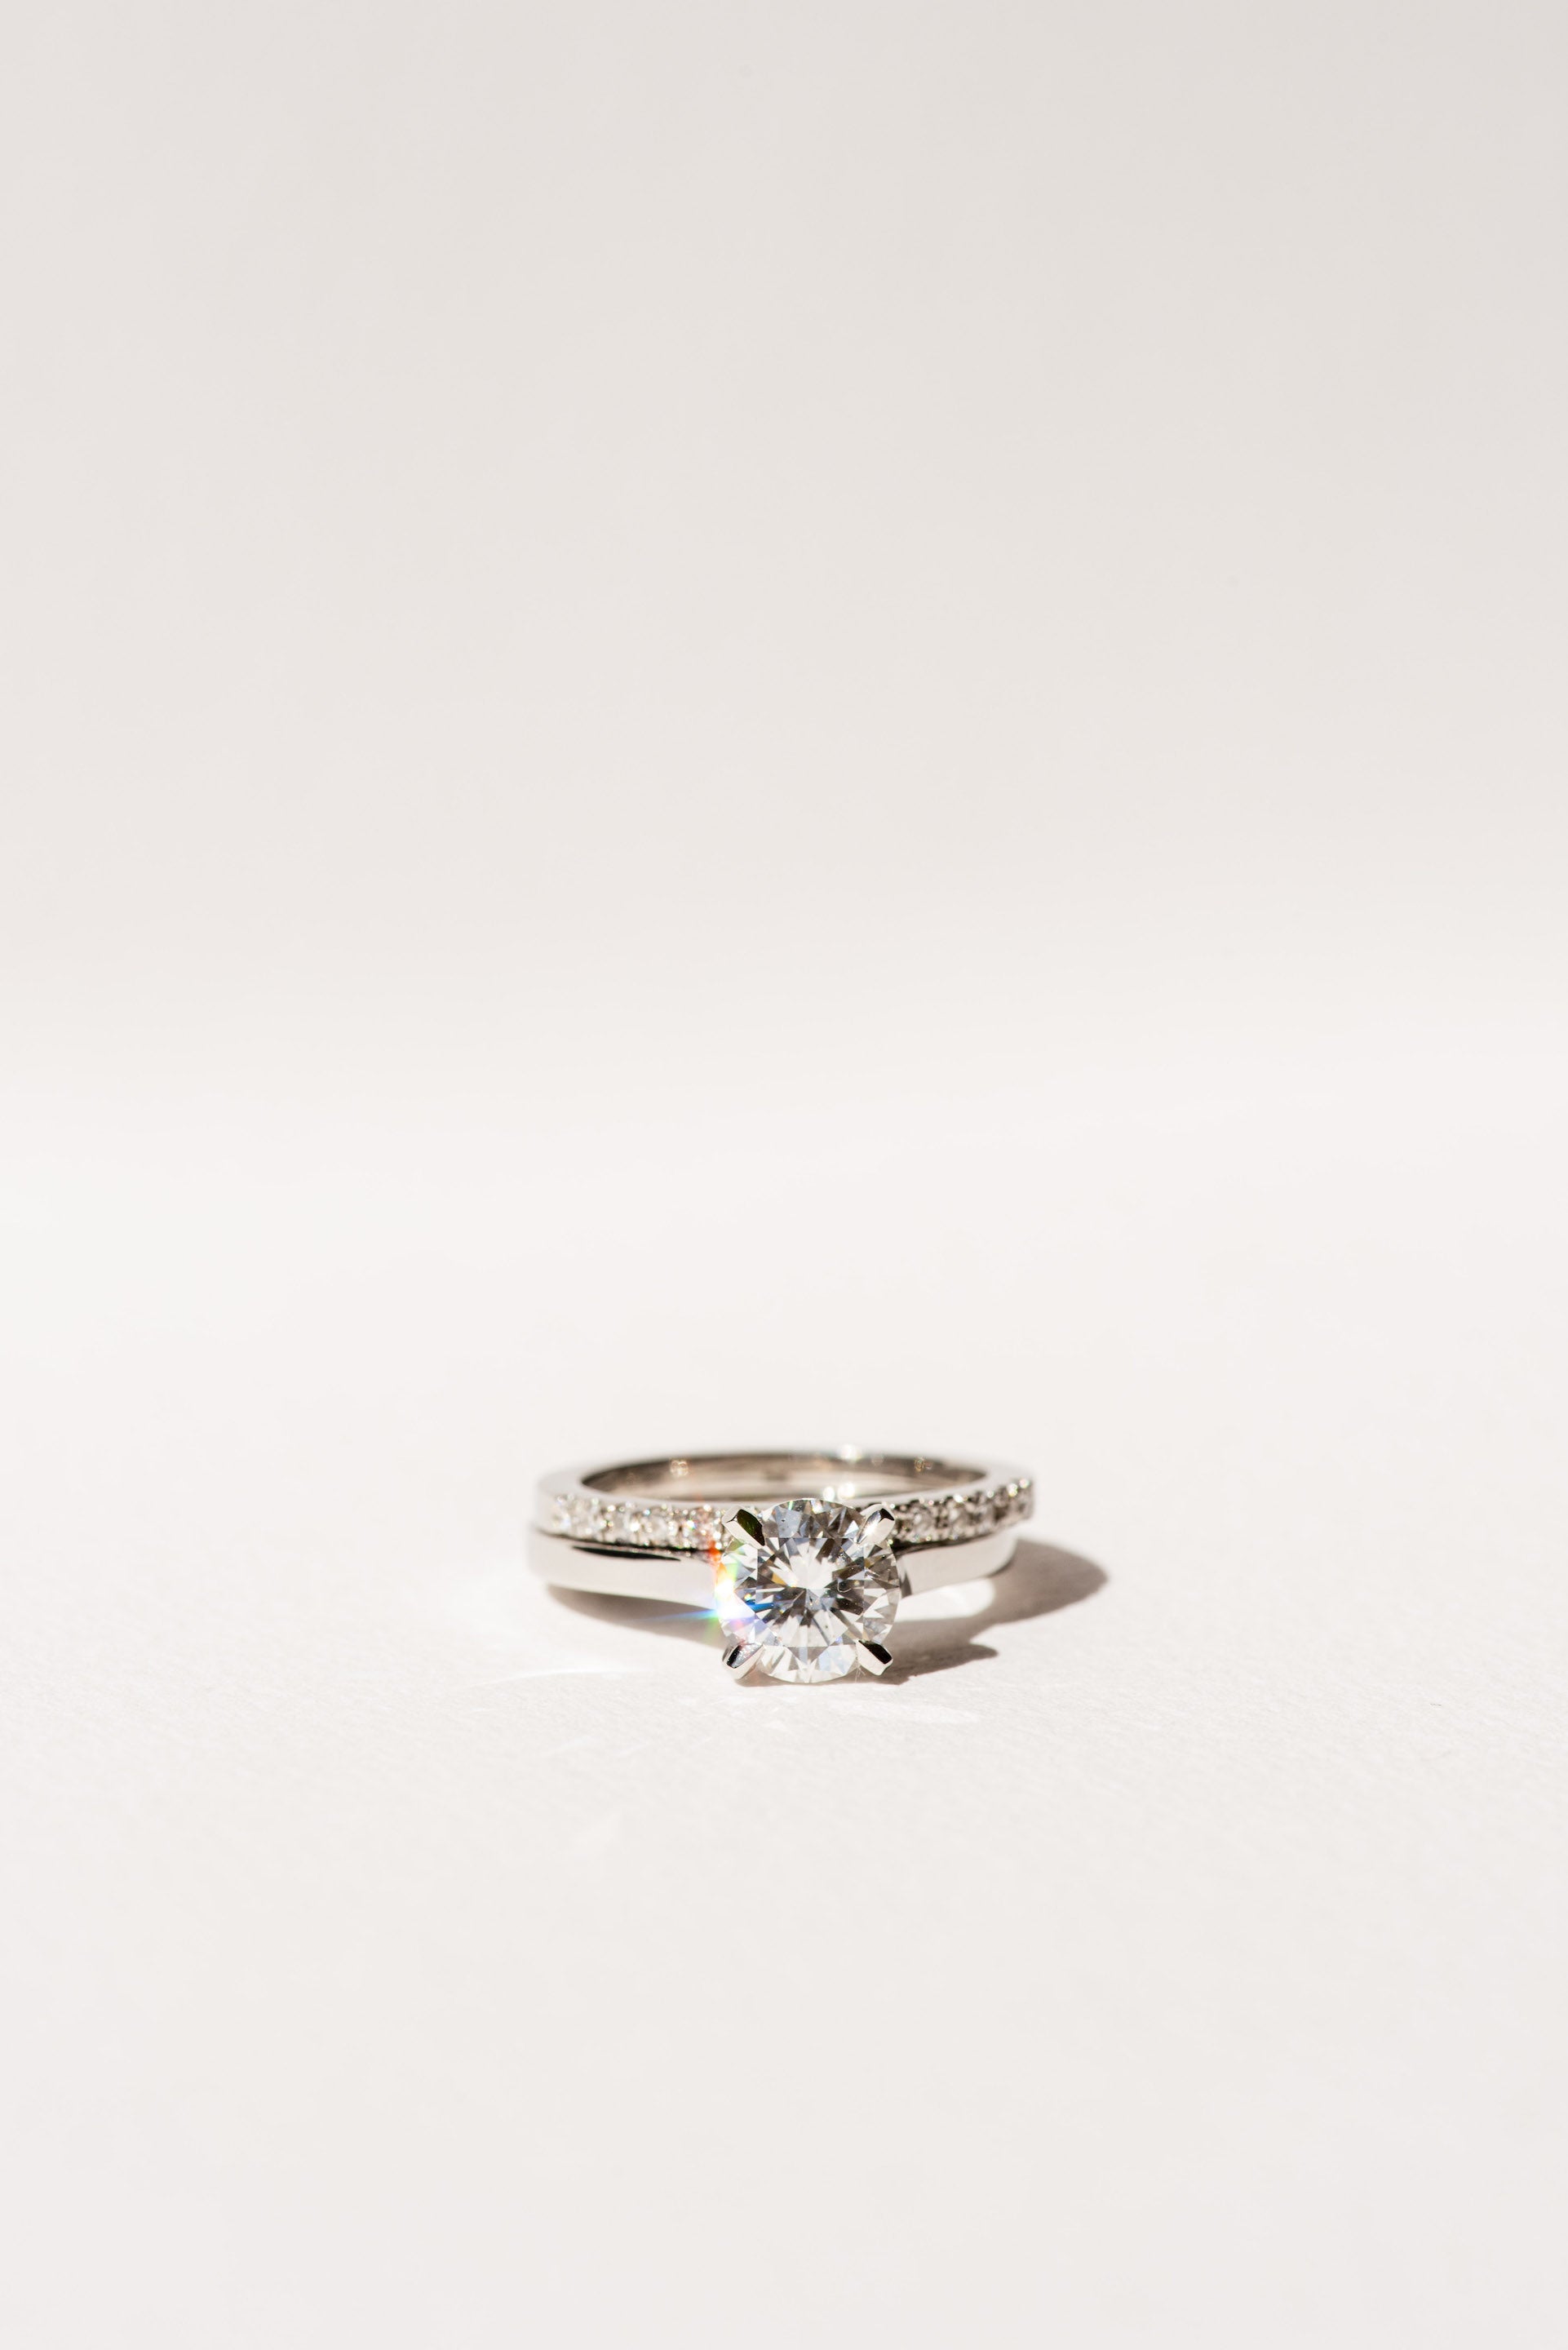 Solitaire Engagement Ring - Bespoke Design - Dean & Dust - Four Claw - Round Diamond